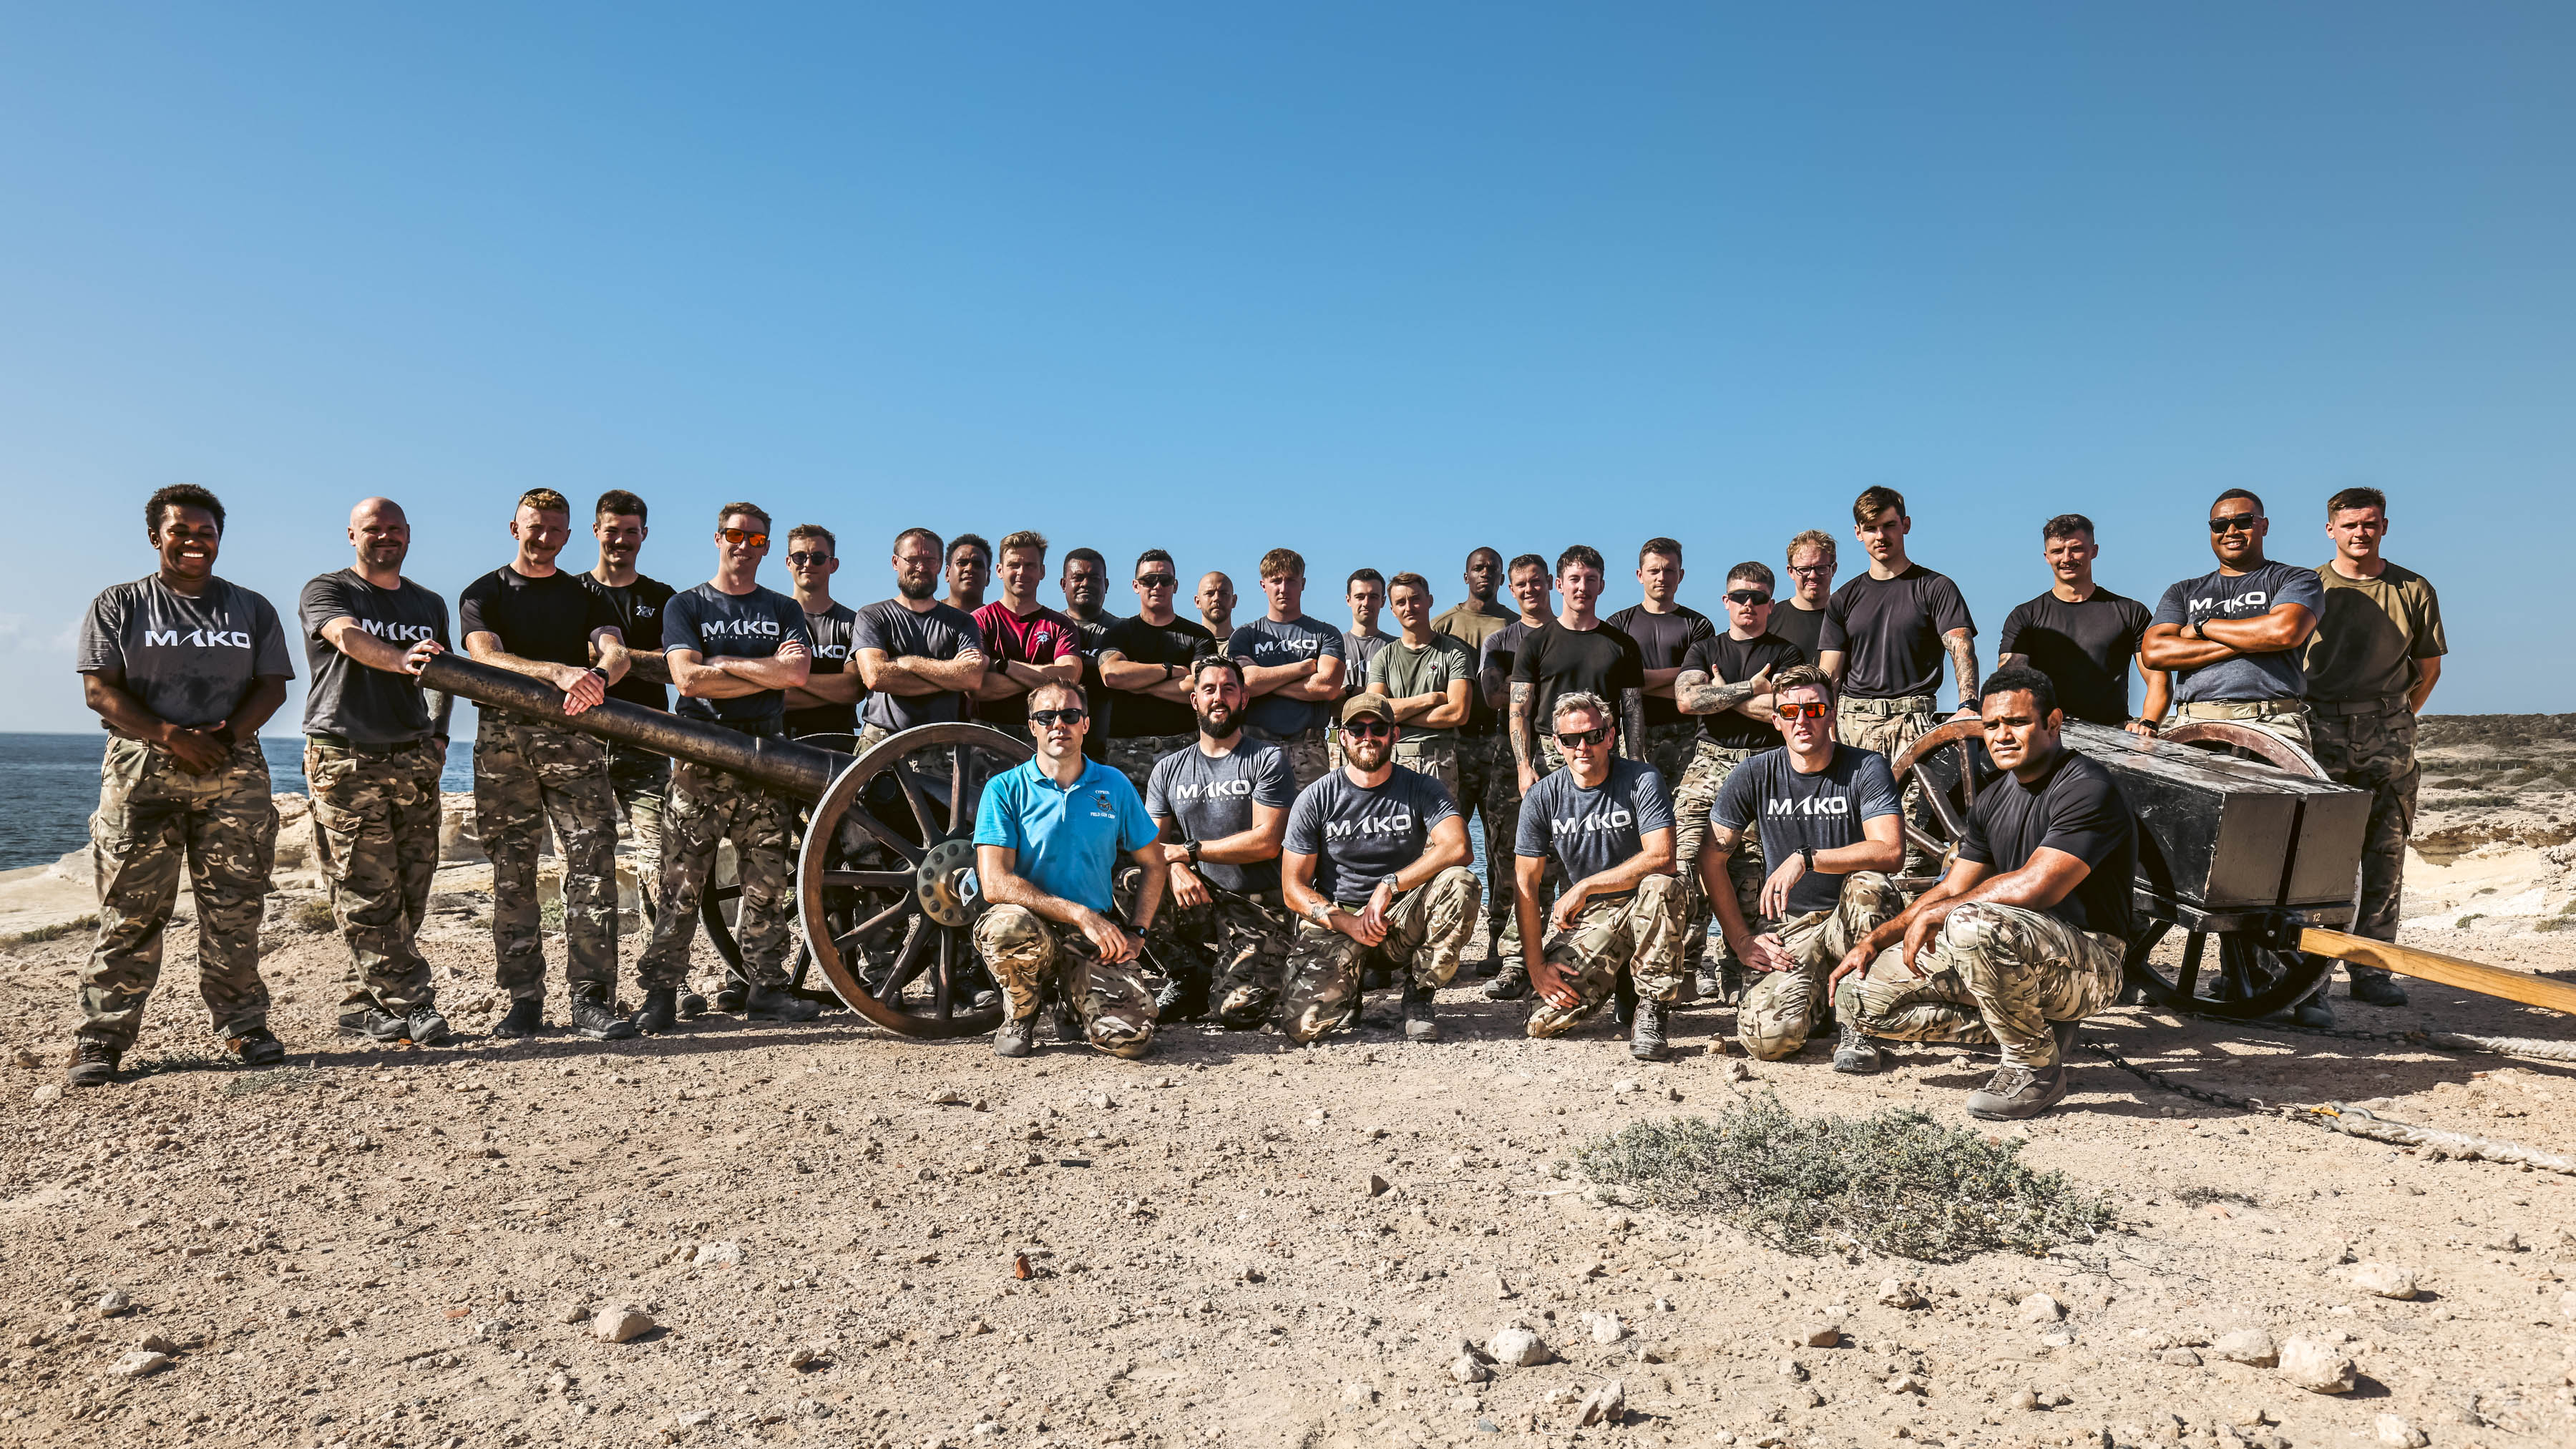 Team photo with the field gun at the top of a rugged hill with the sea in the background.